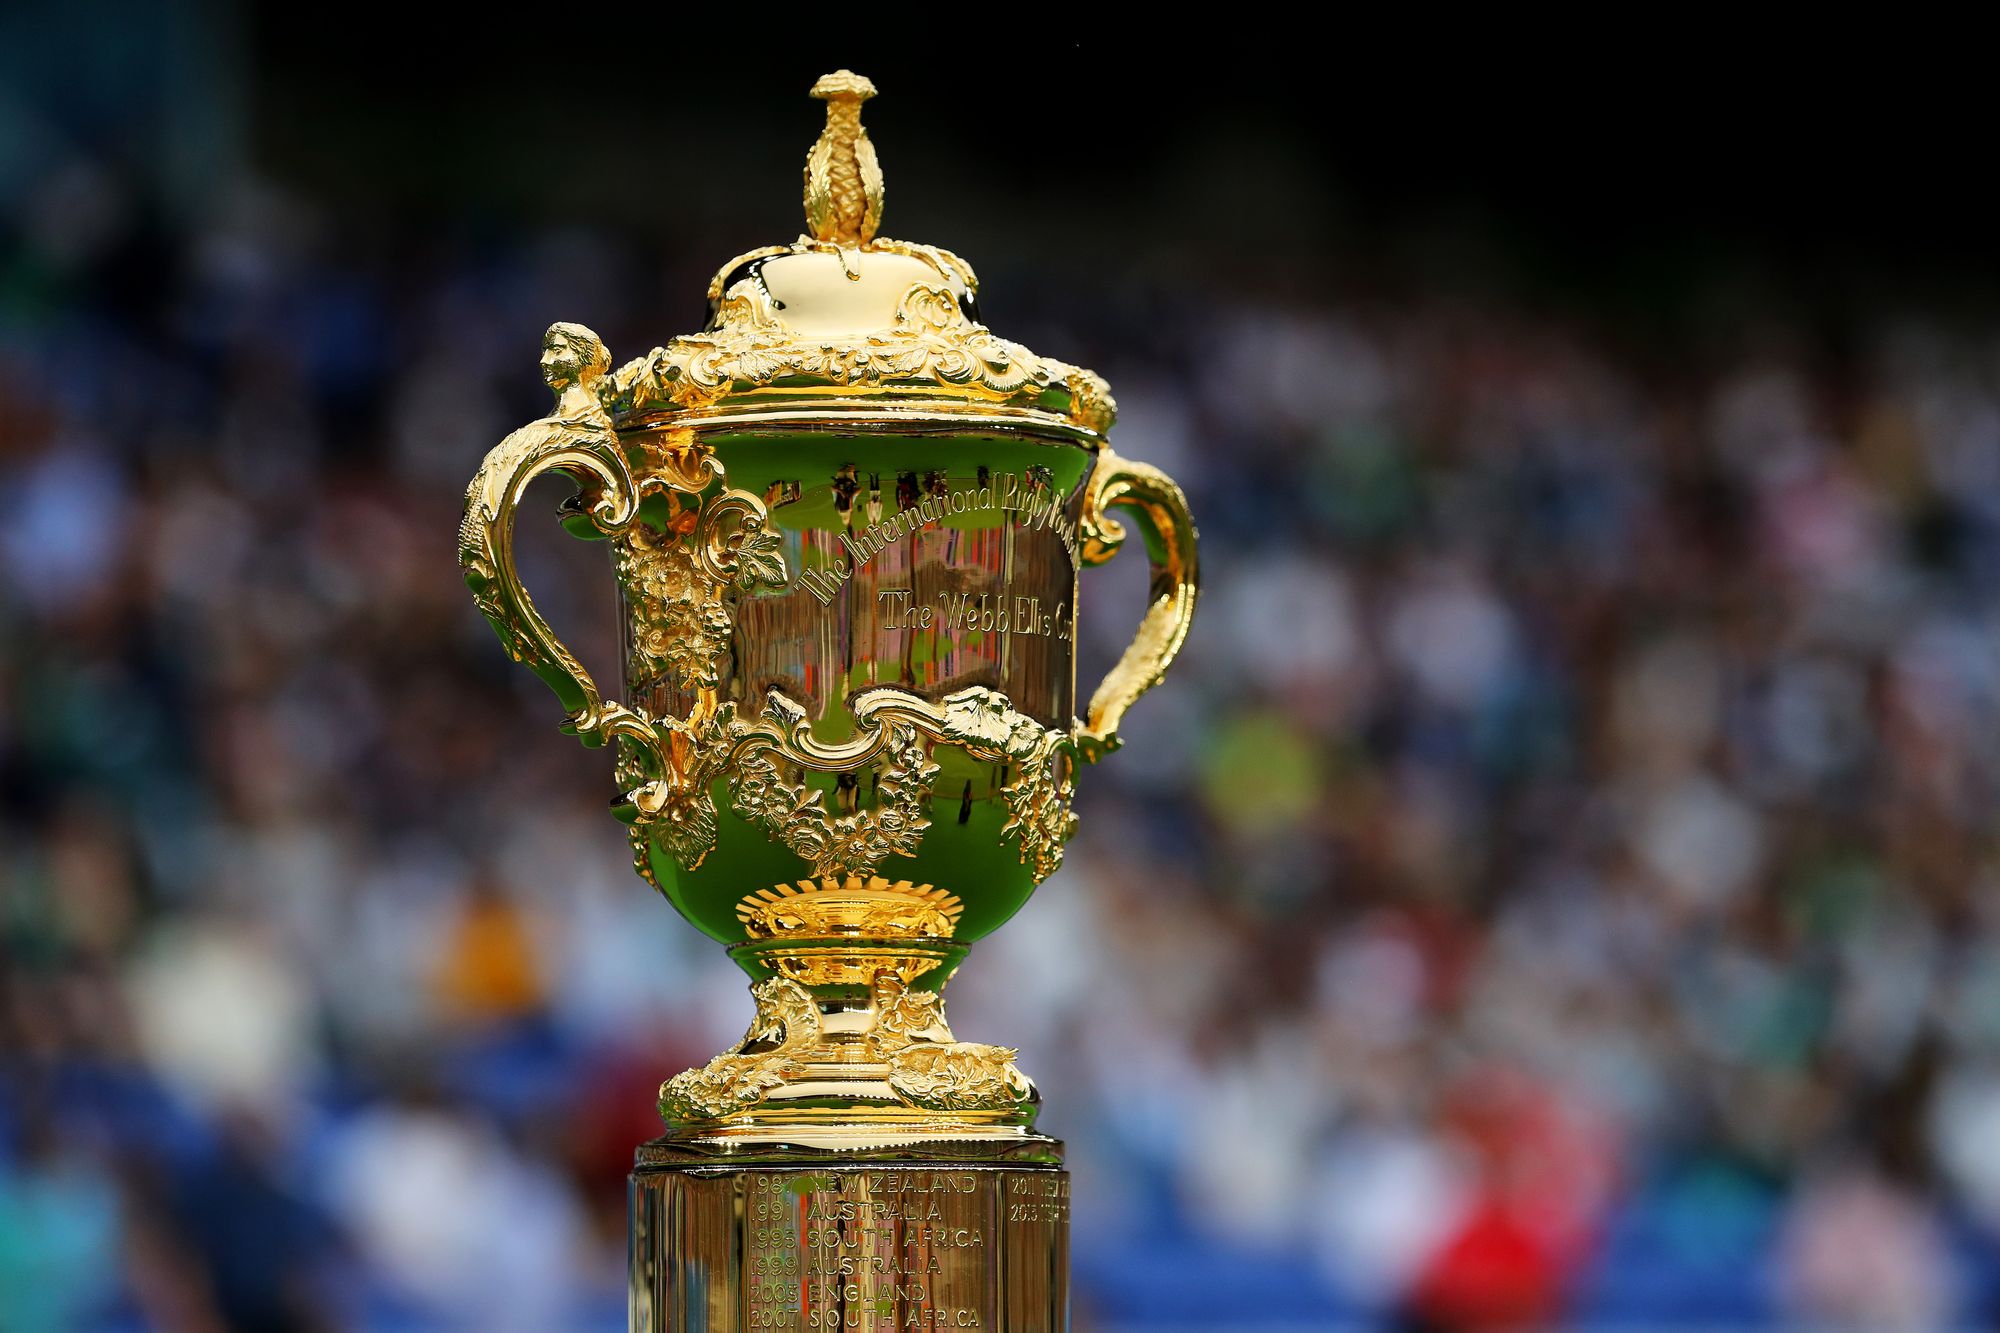 New Zealand vs South Africa. The most successful nations in Rugby World Cup history all set to meet in the final in Paris